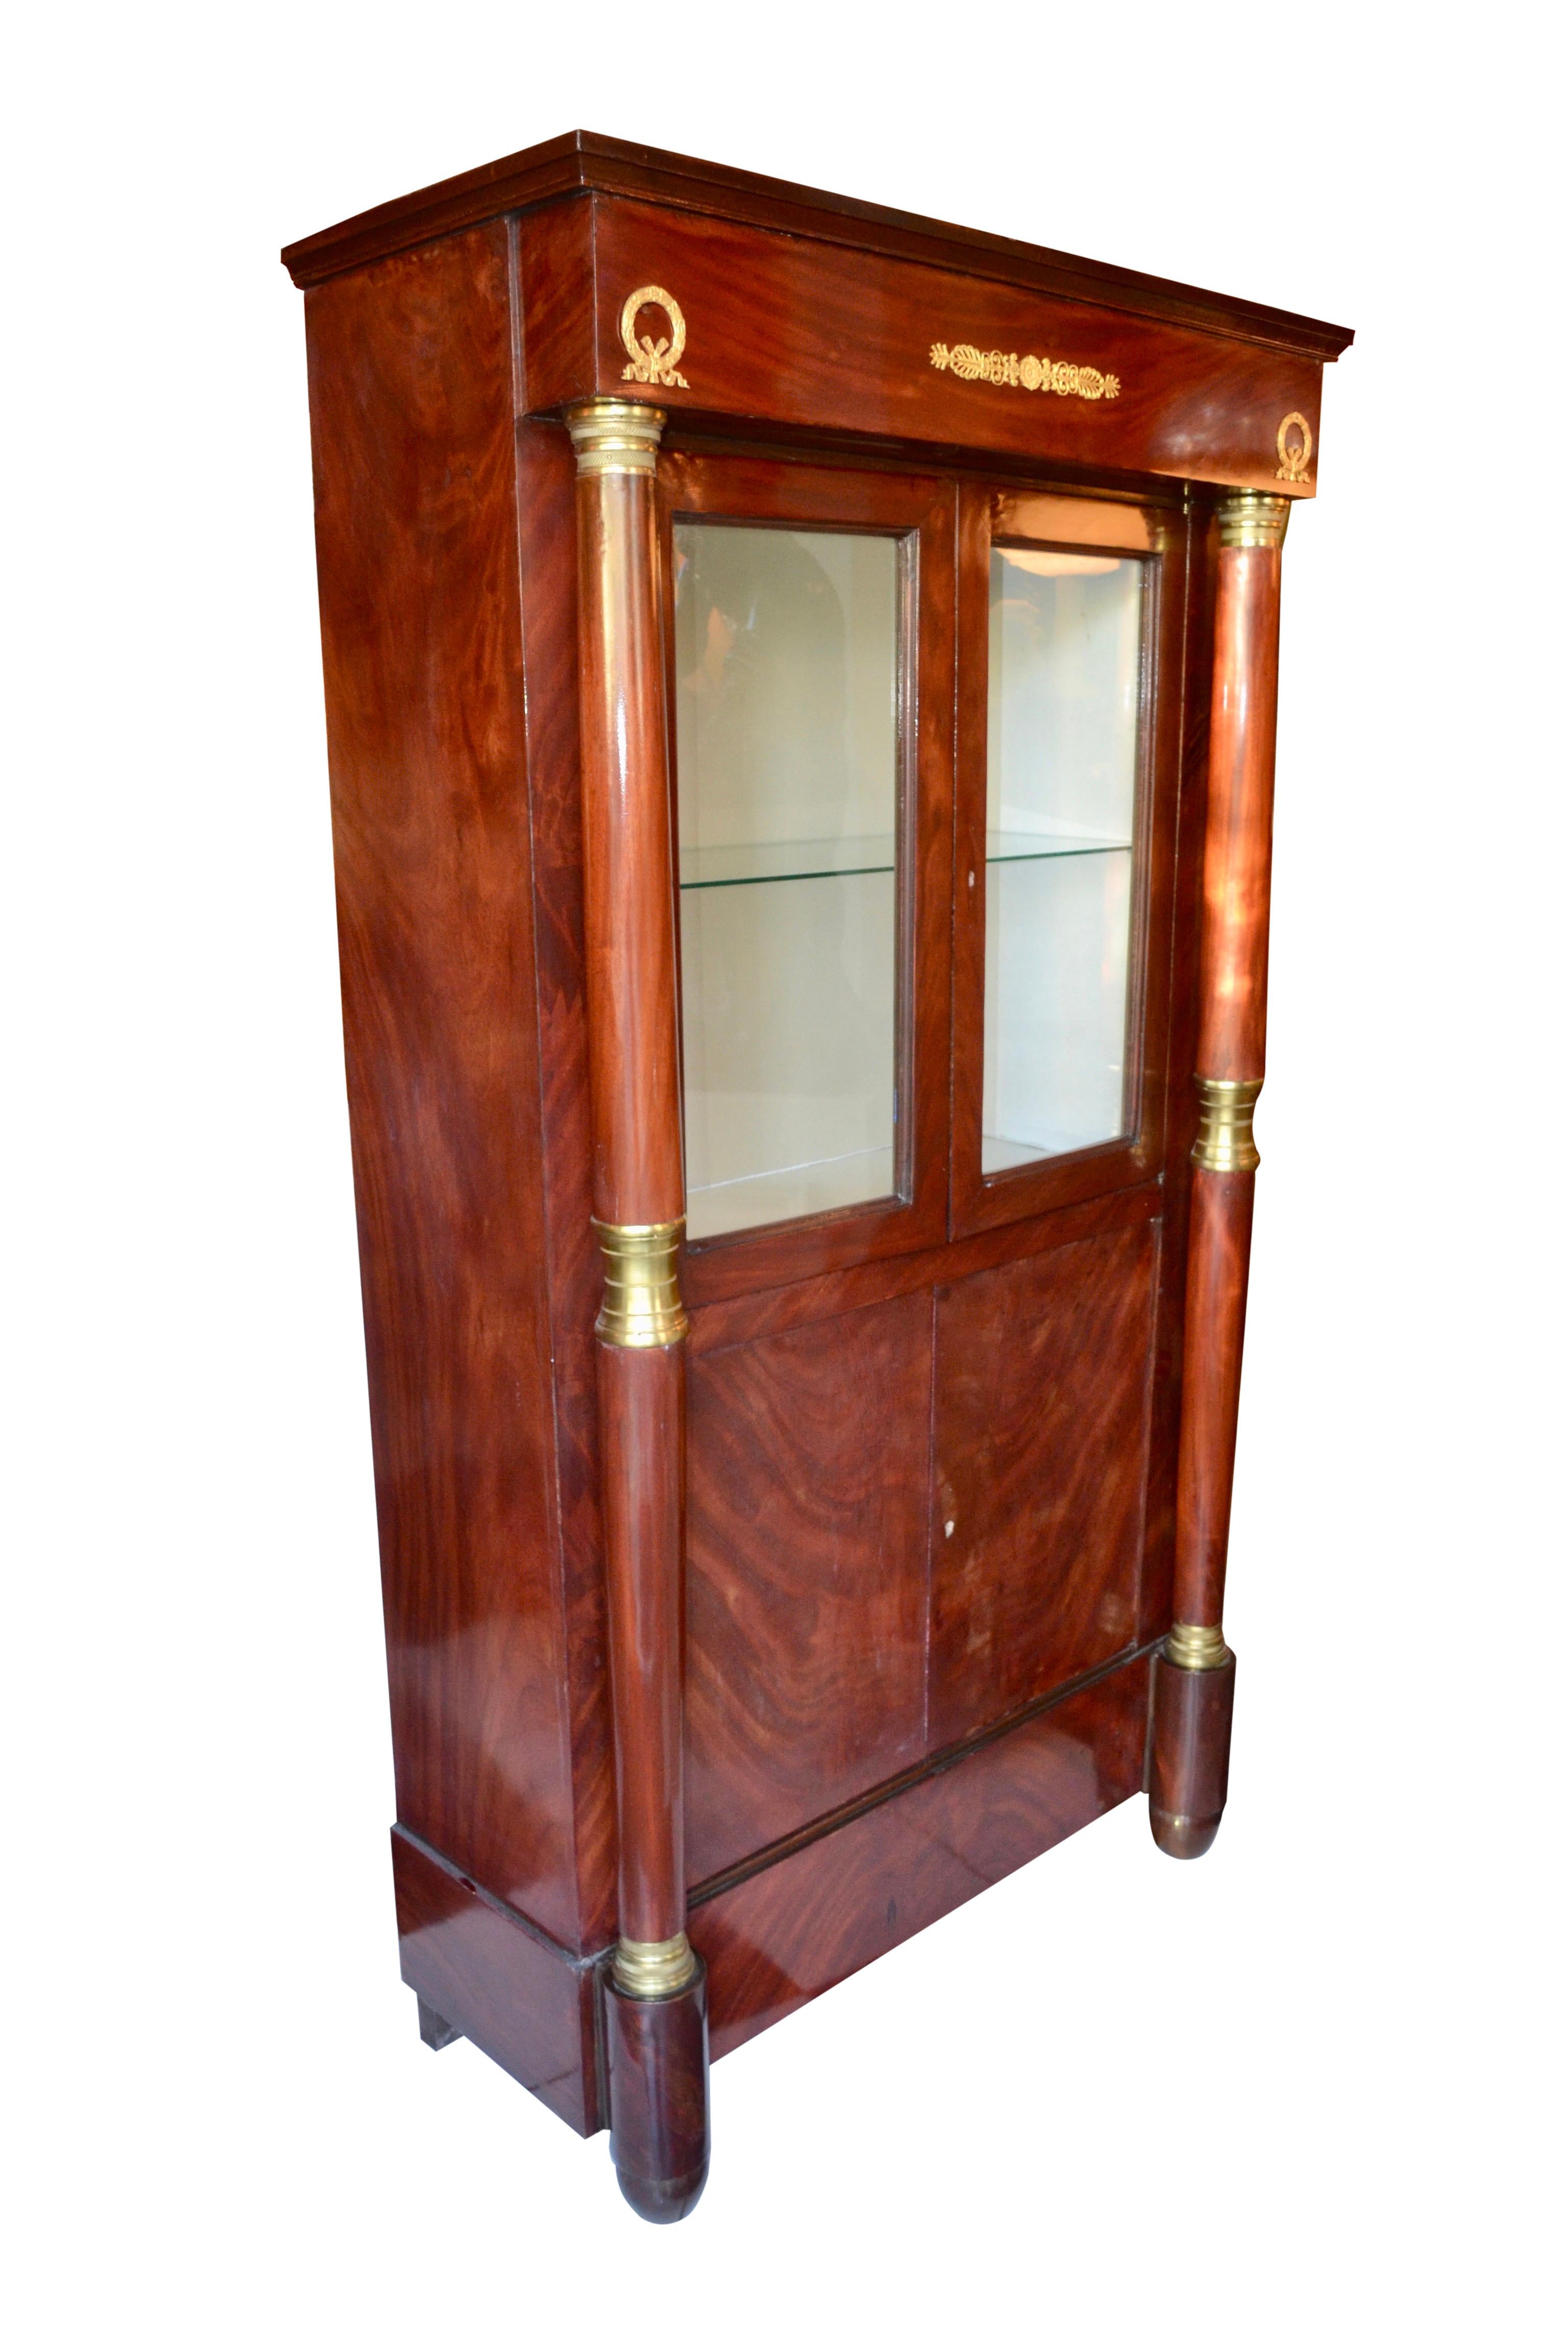 A mahogany cabinet decorated with gilded metal mounts constructed in two sections, the upper section with two glazed doors flanked by mahogany columns opens to reveal a fabric lined interior with one glass shelf, the lower section with two book